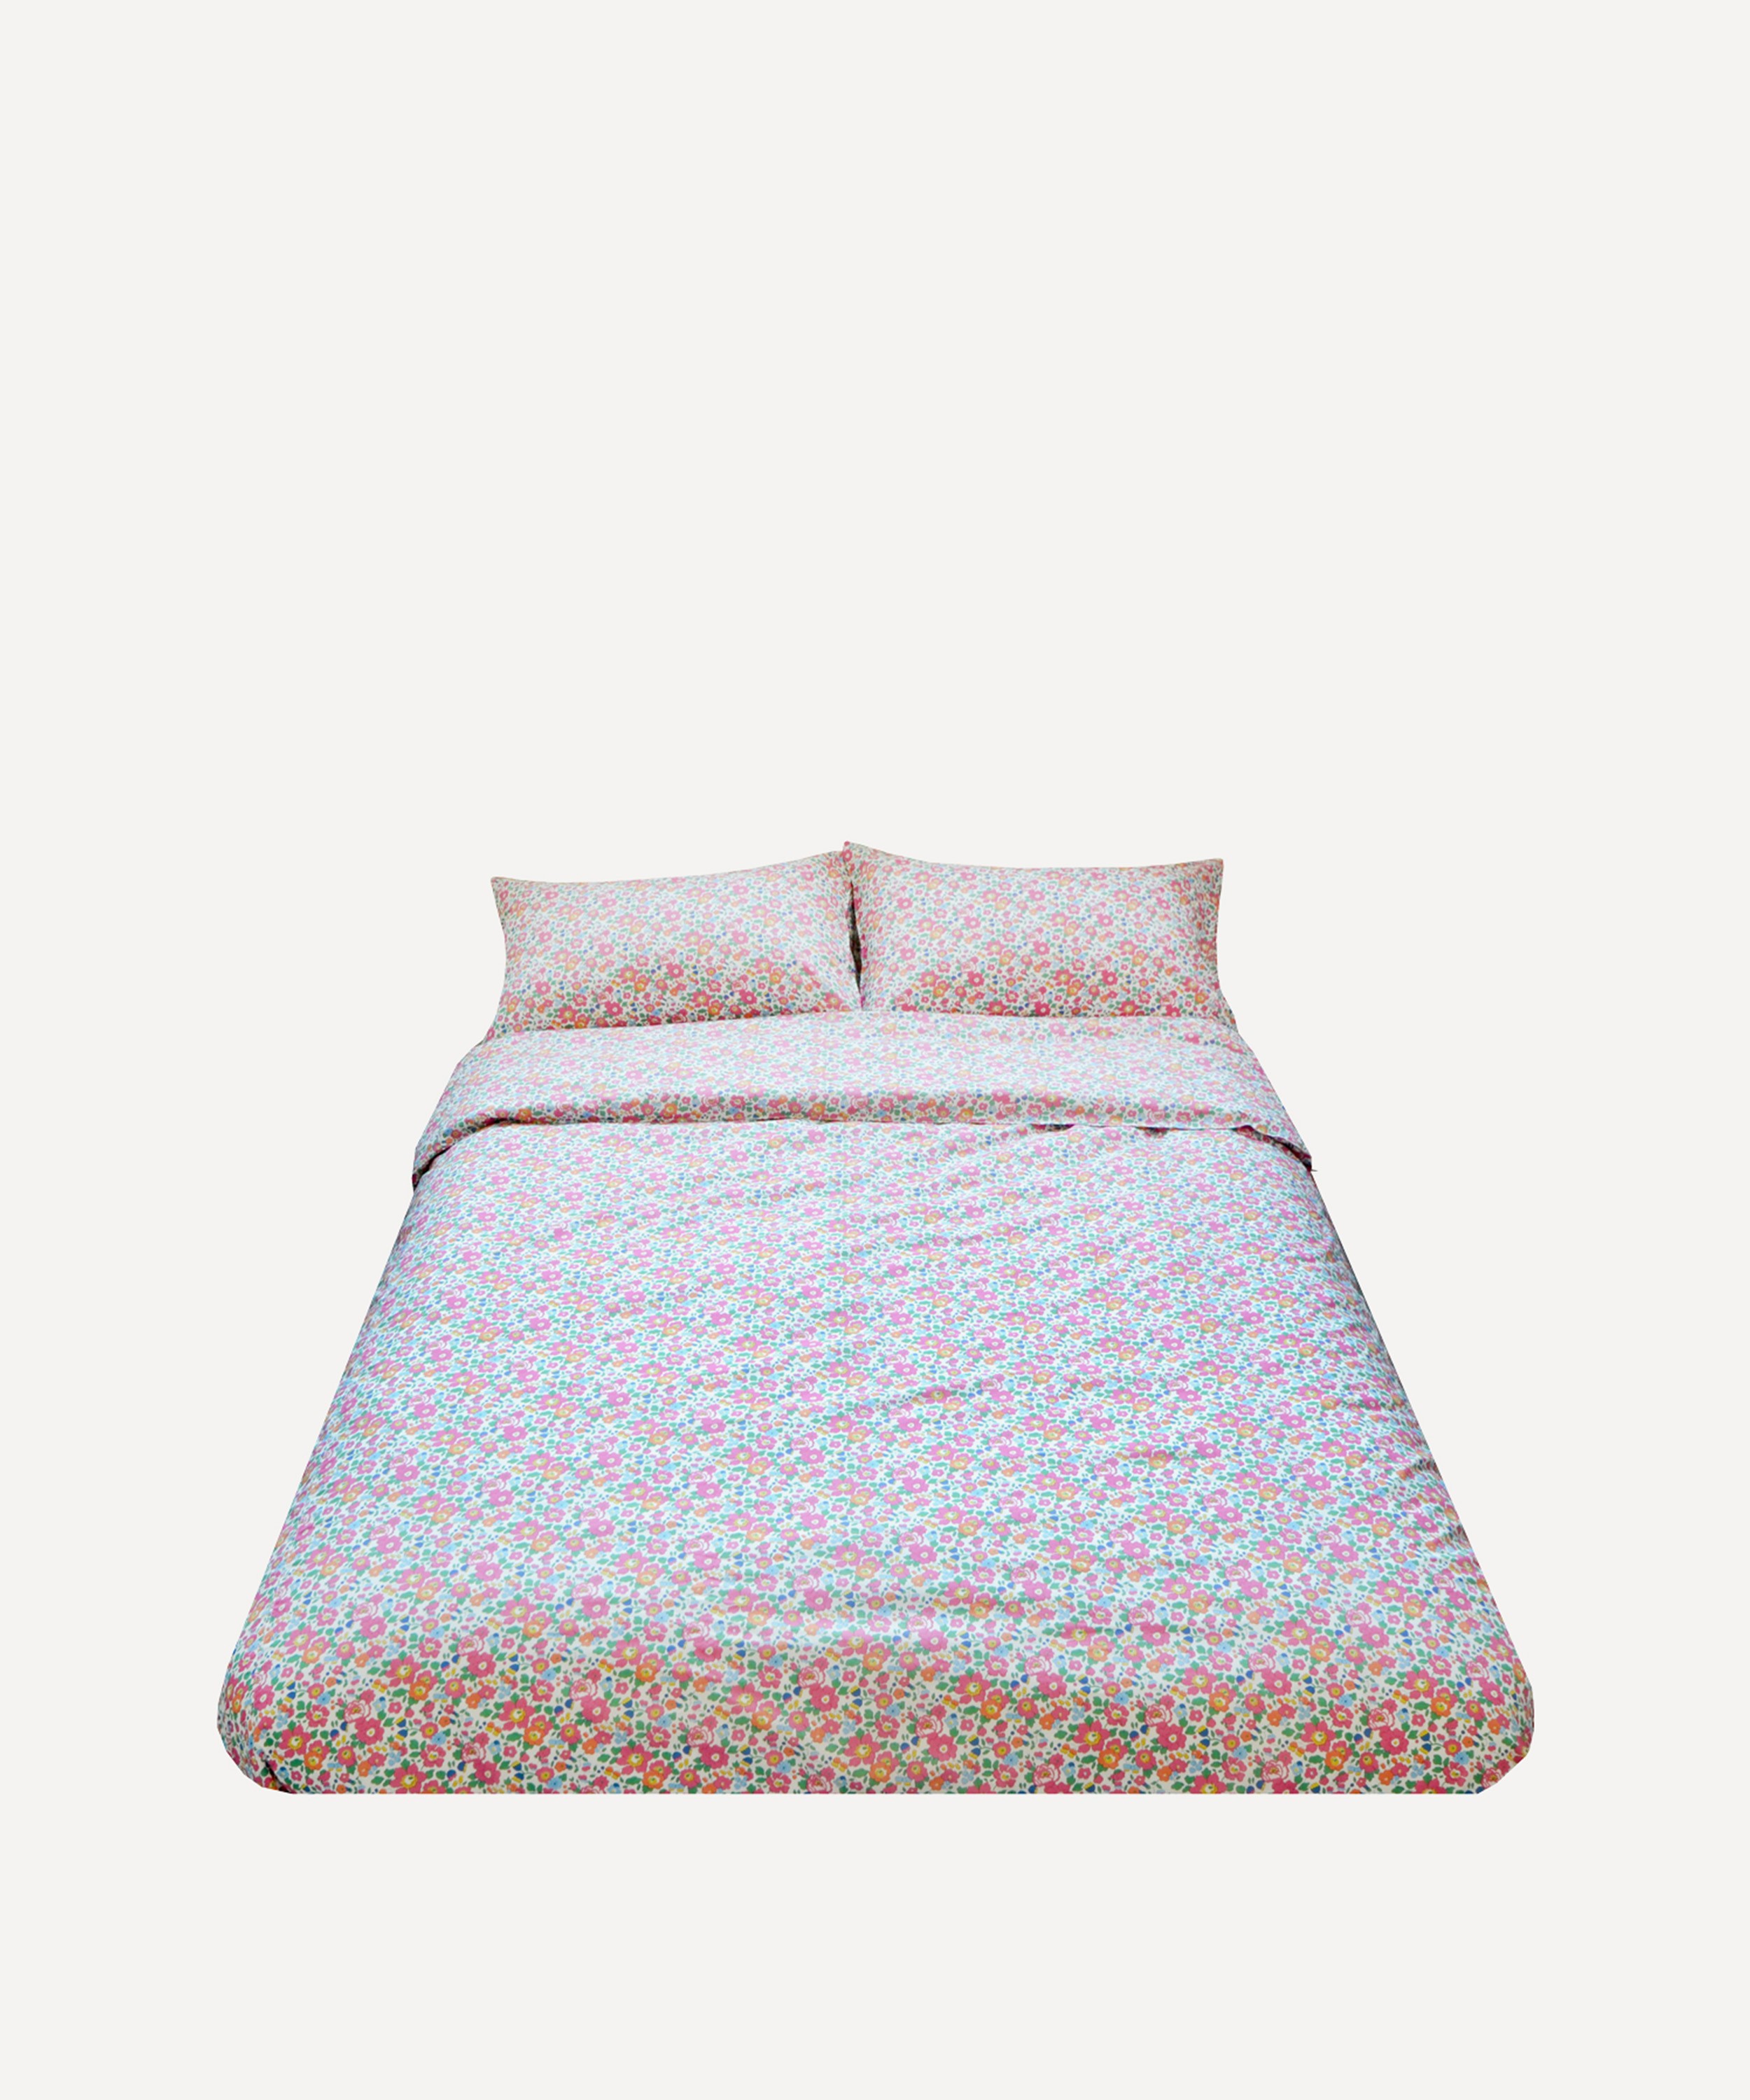 Coco & Wolf - Betsy Deep Pink Super King Duvet Cover Set image number 0